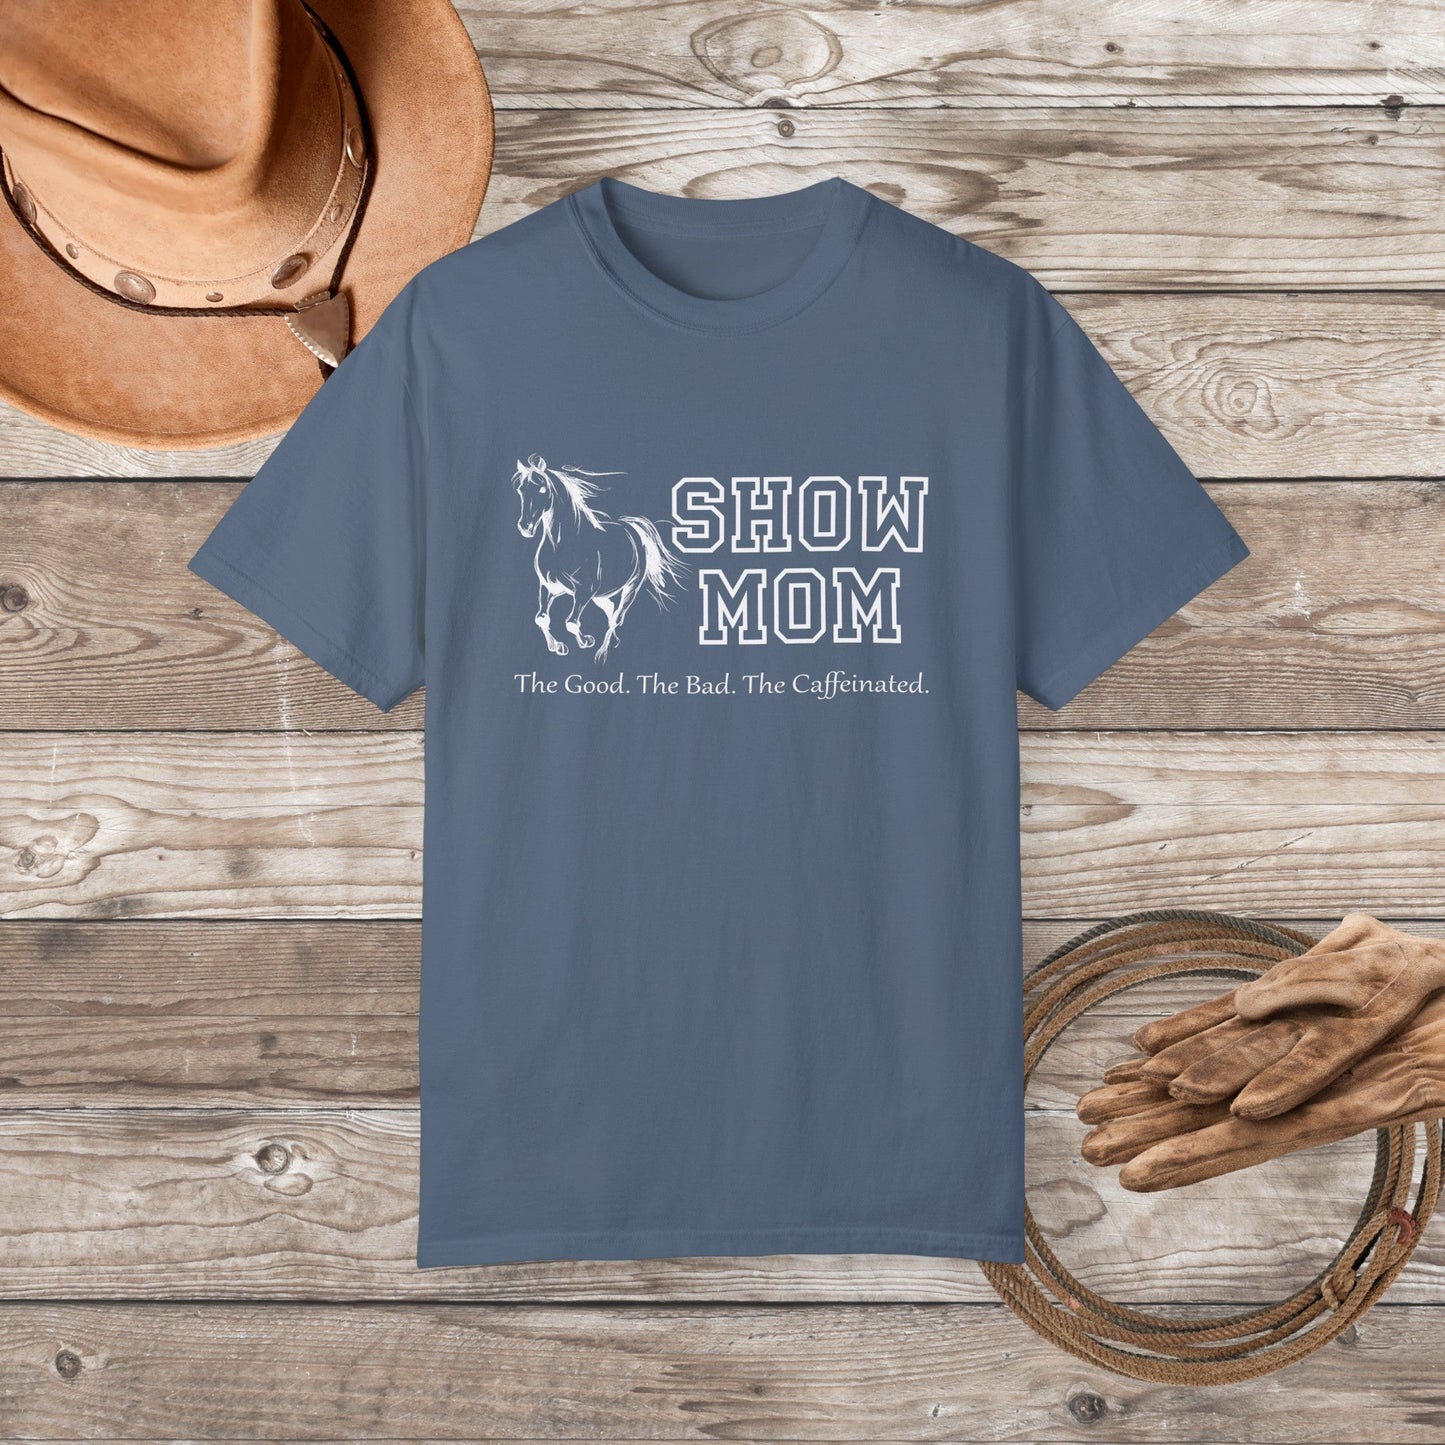 Comfort Colors Horse Show Mom Shirt, New Horse Show Mom Art Tee, Show Ring Shirt, Ranch Life, Rodeo Cowboy Gift, Horse Show Lover Gift - FlooredByArt